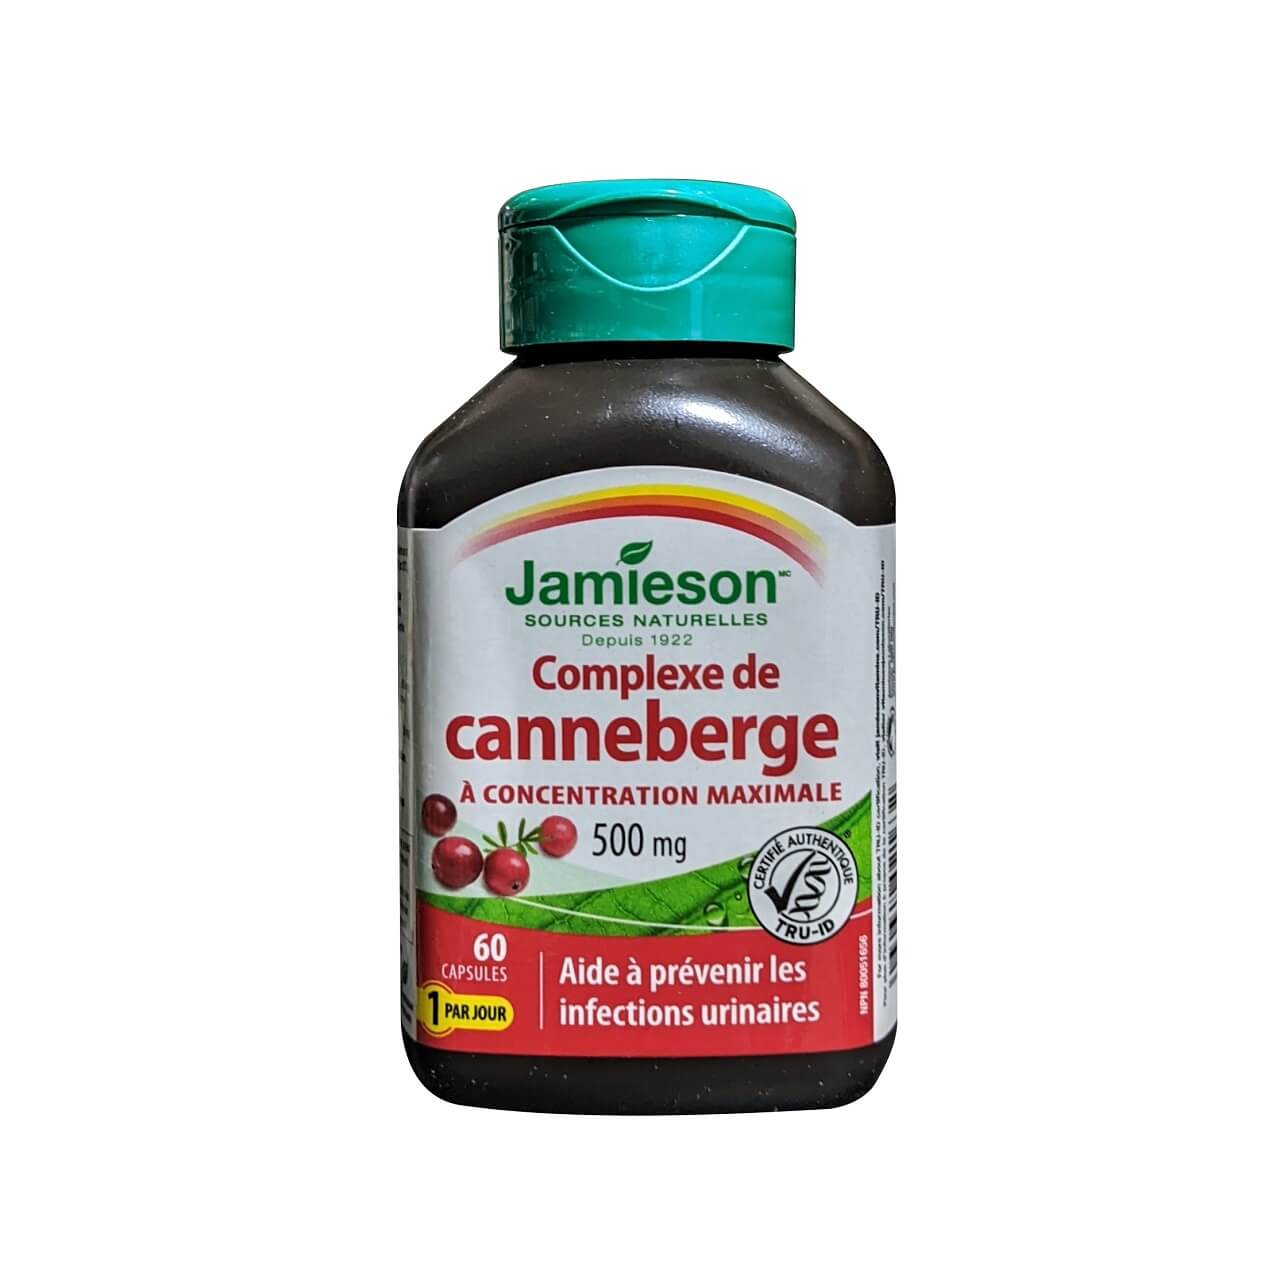 Product label for Jamieson Cranberry Complex 500 mg Maximum Concentrate (60 capsules) in French